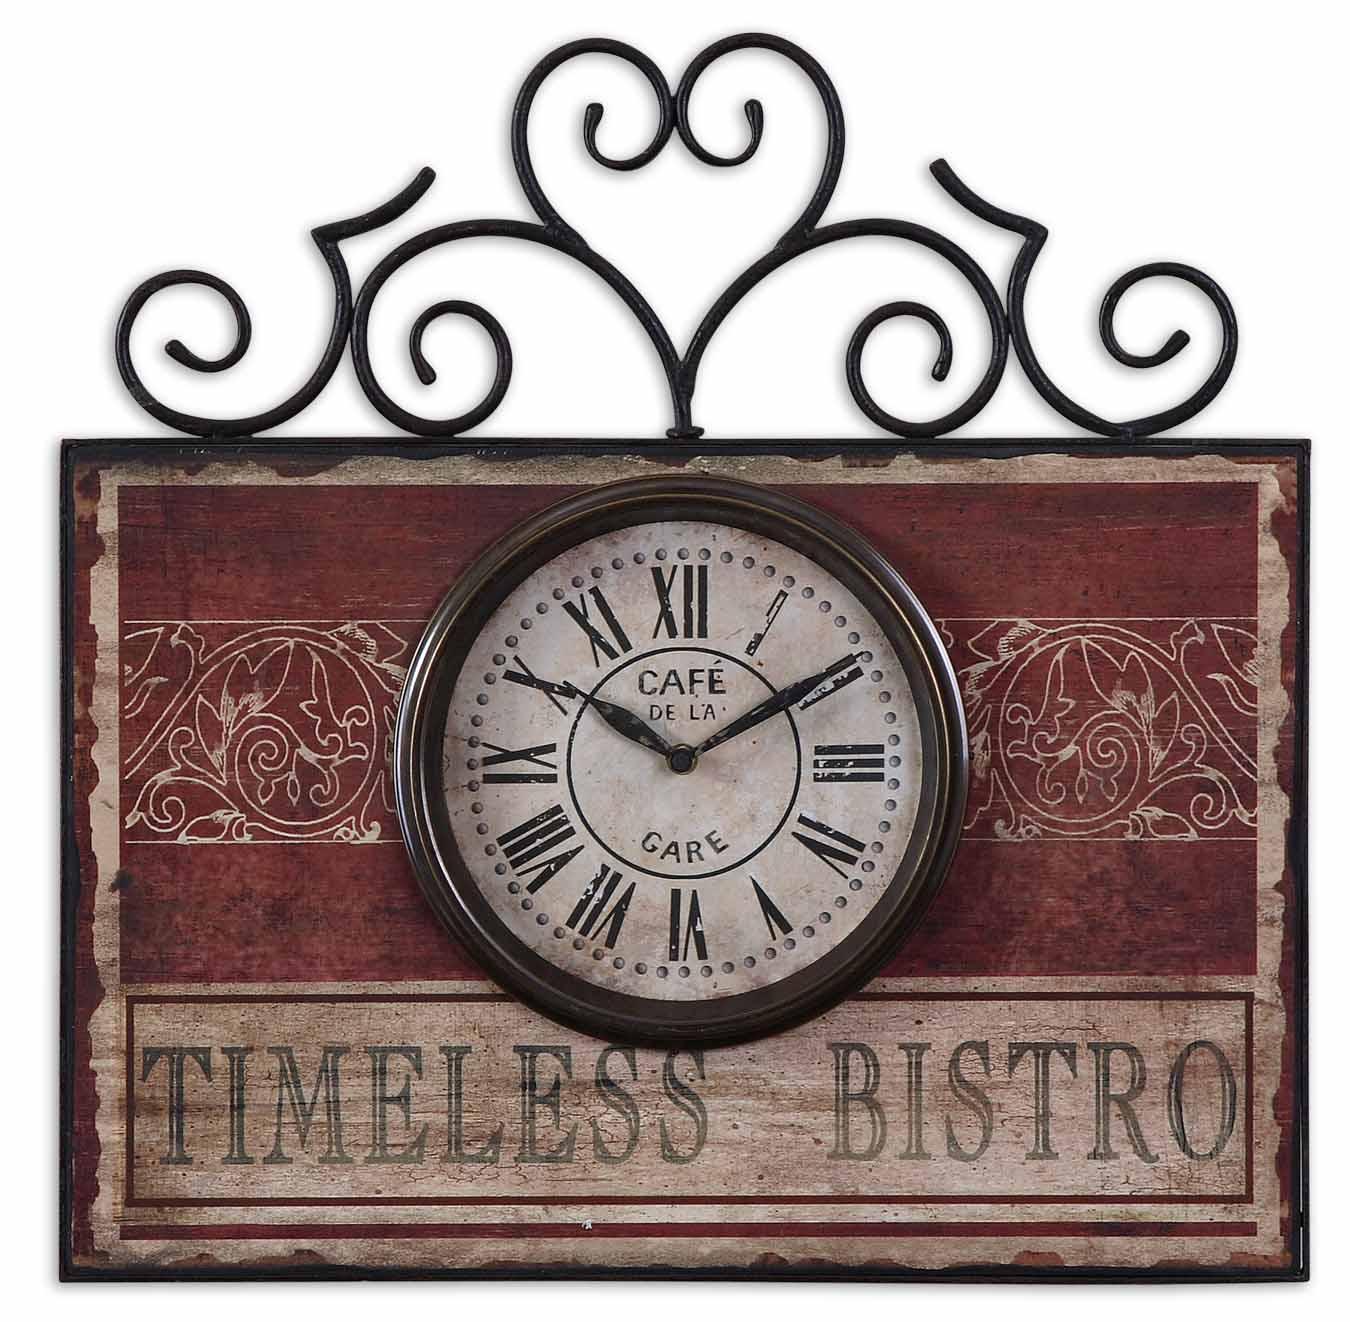 Uttermost 06663 Timeless bistro - фото 1